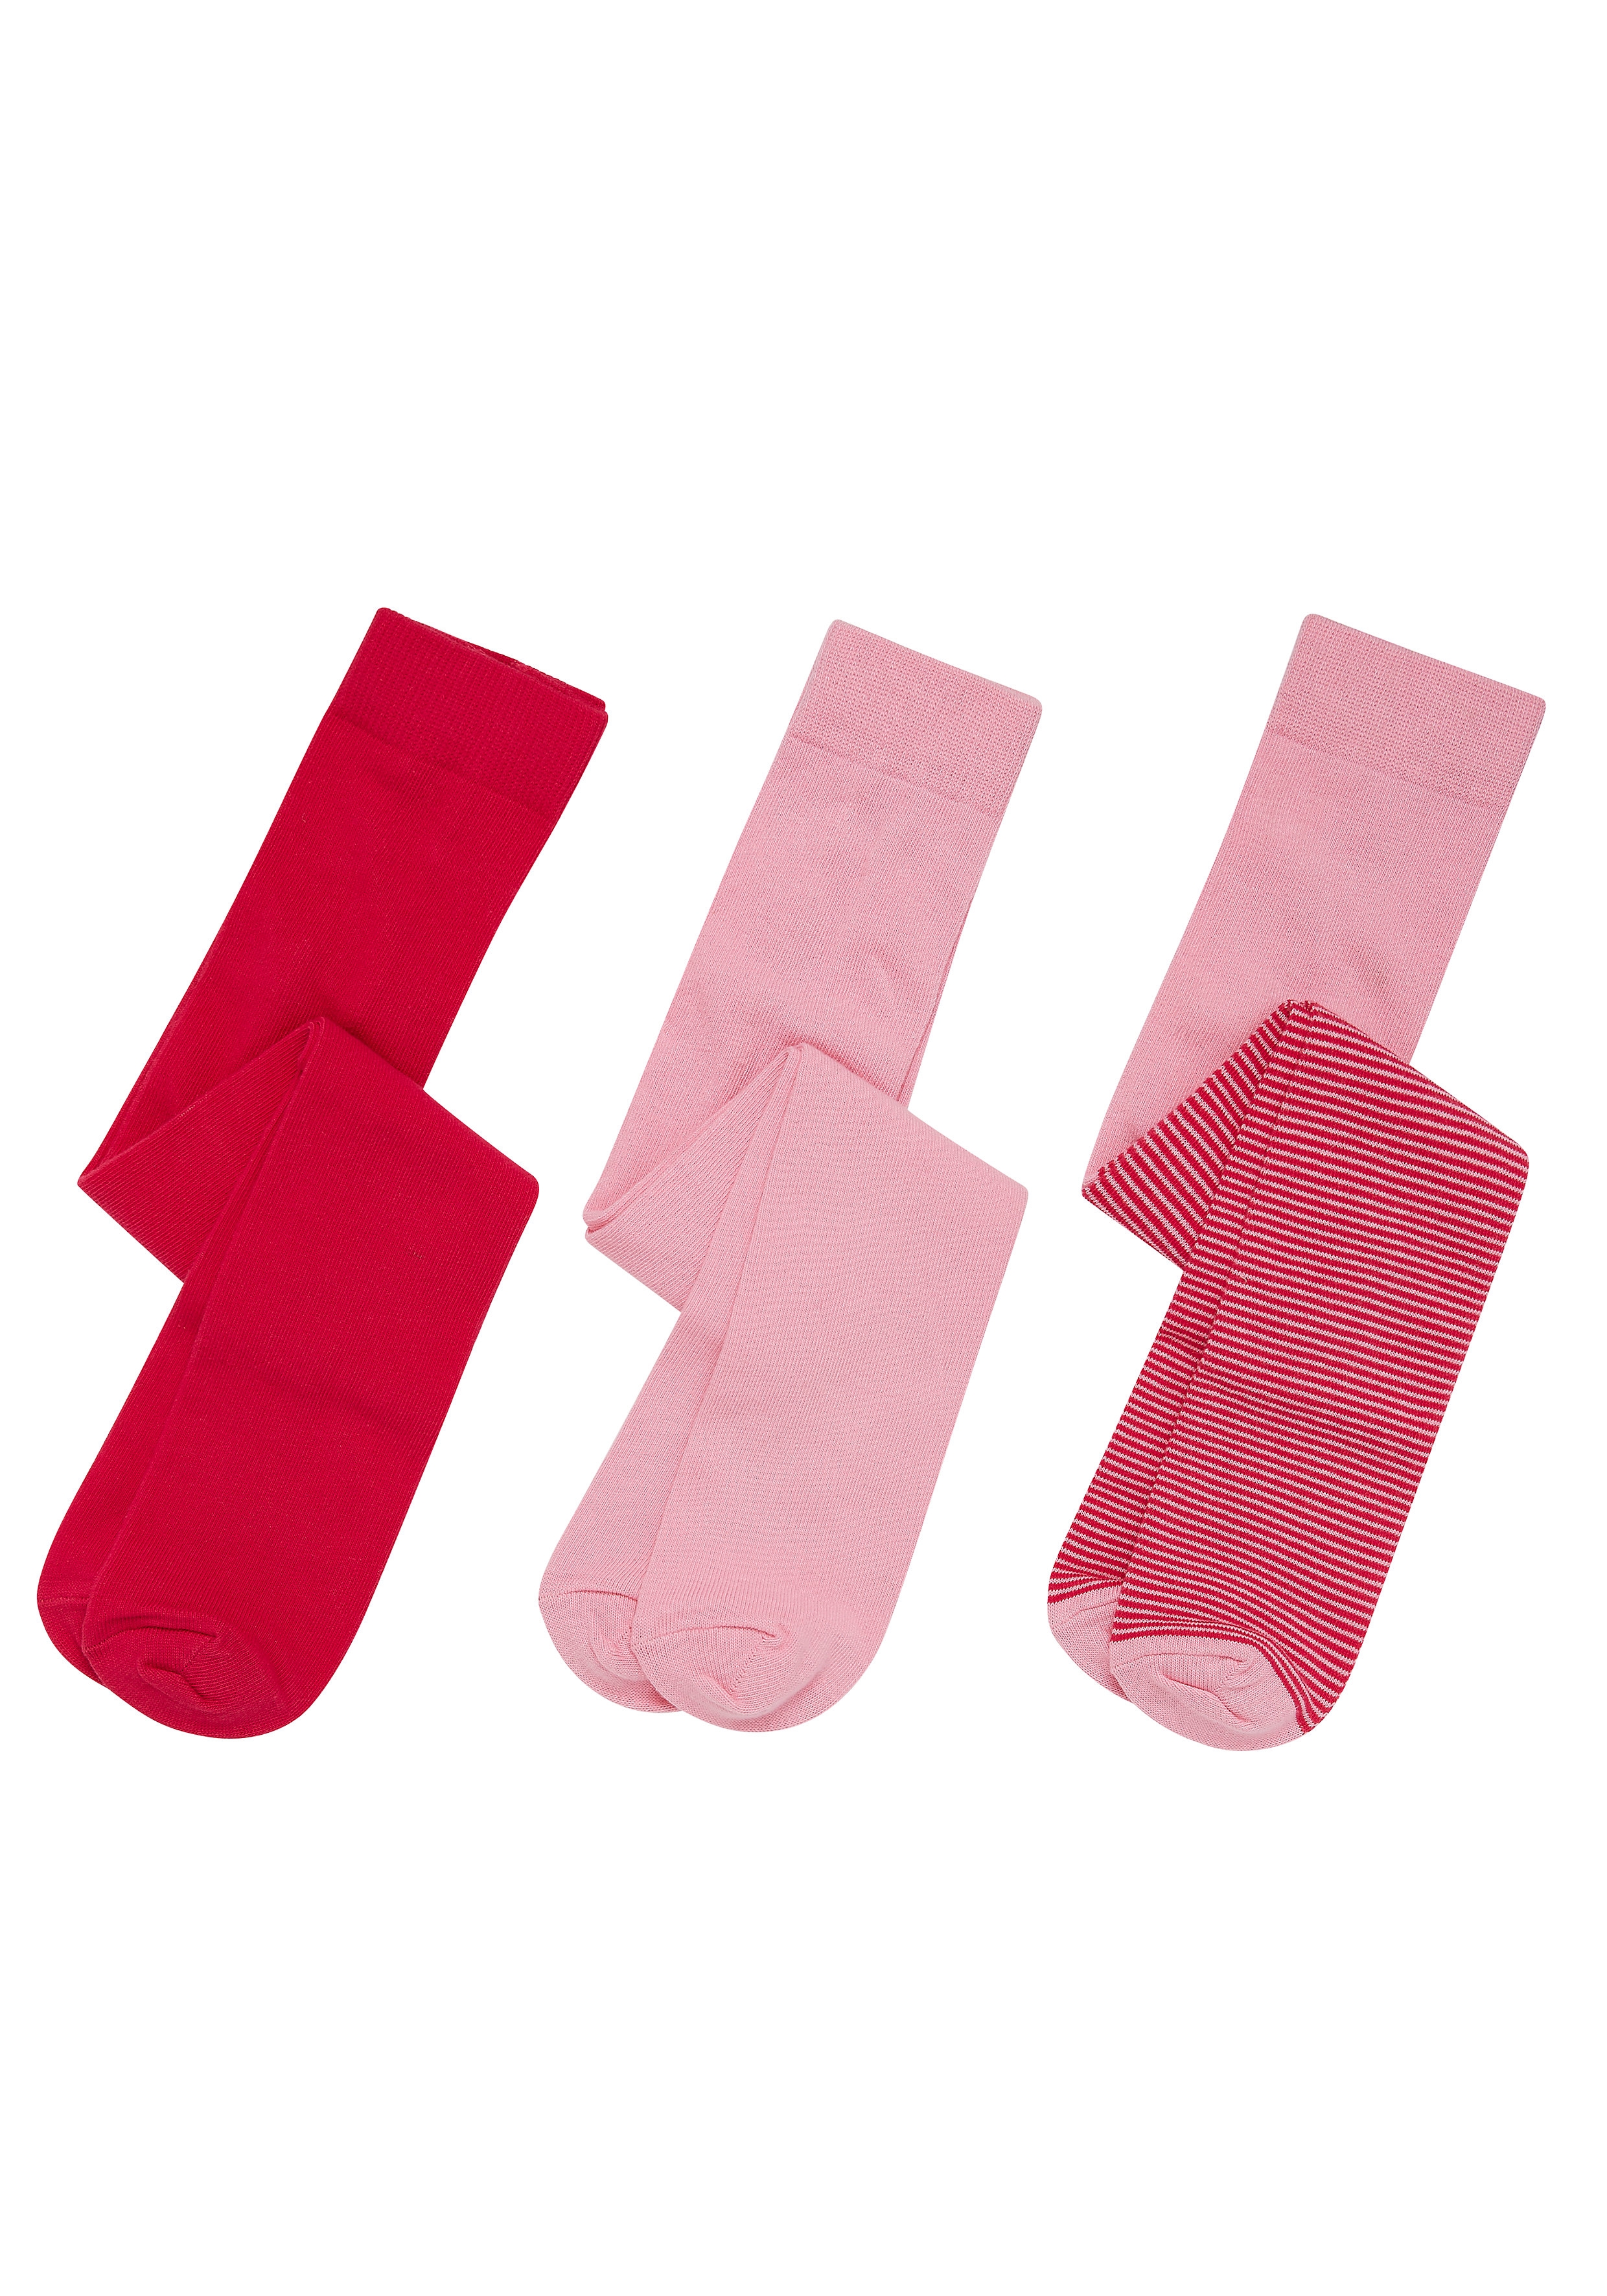 Mothercare | Girls Tights Striped - Pack Of 3 - Multicolor 0